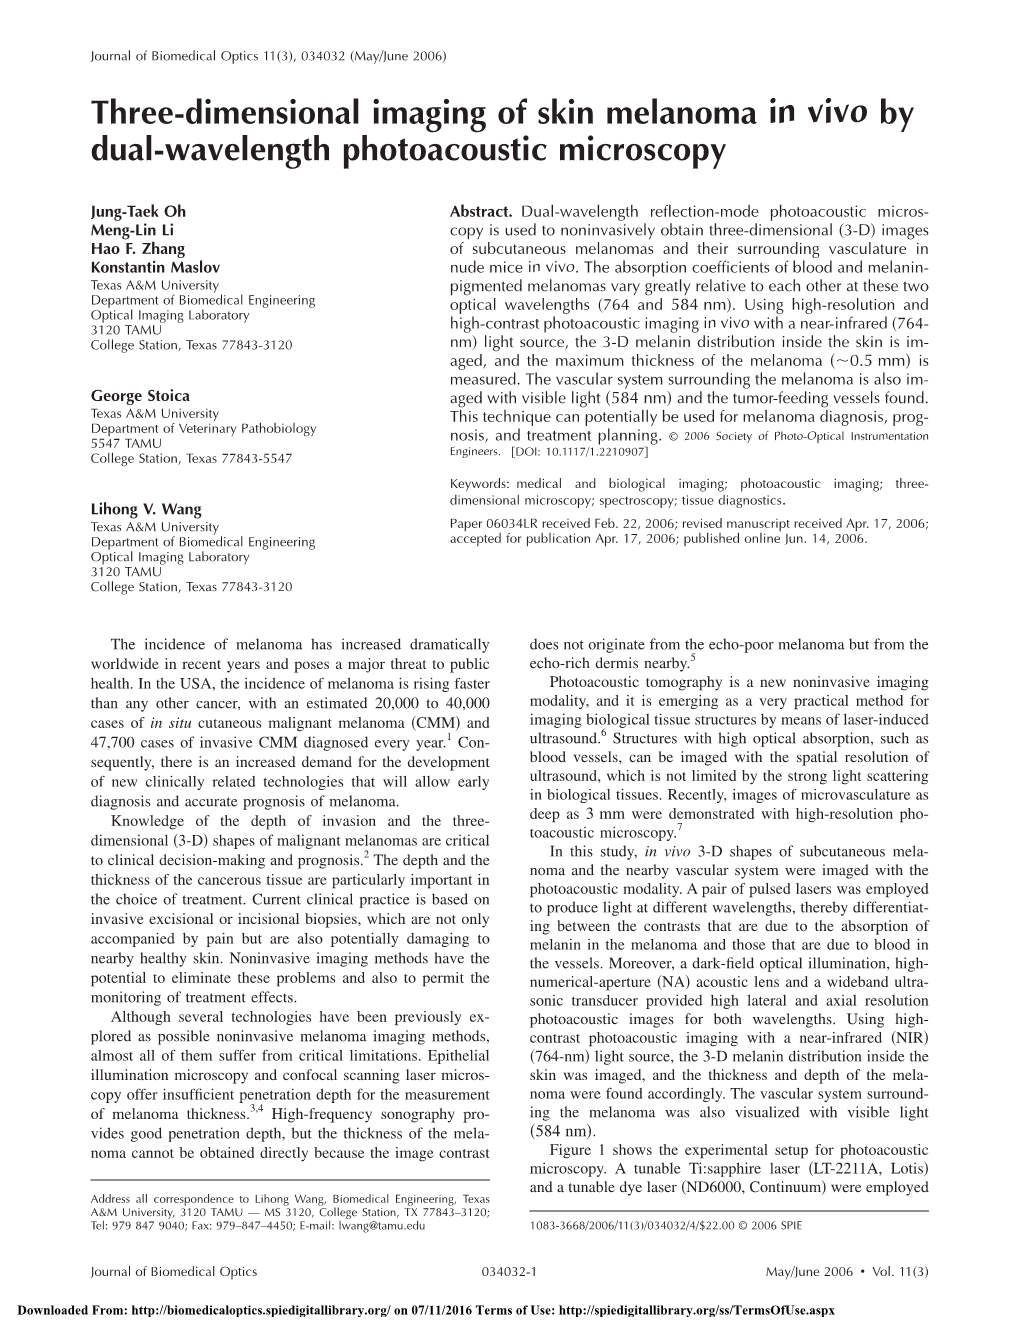 Three-Dimensional Imaging of Skin Melanoma in Vivo by Dual-Wavelength Photoacoustic Microscopy